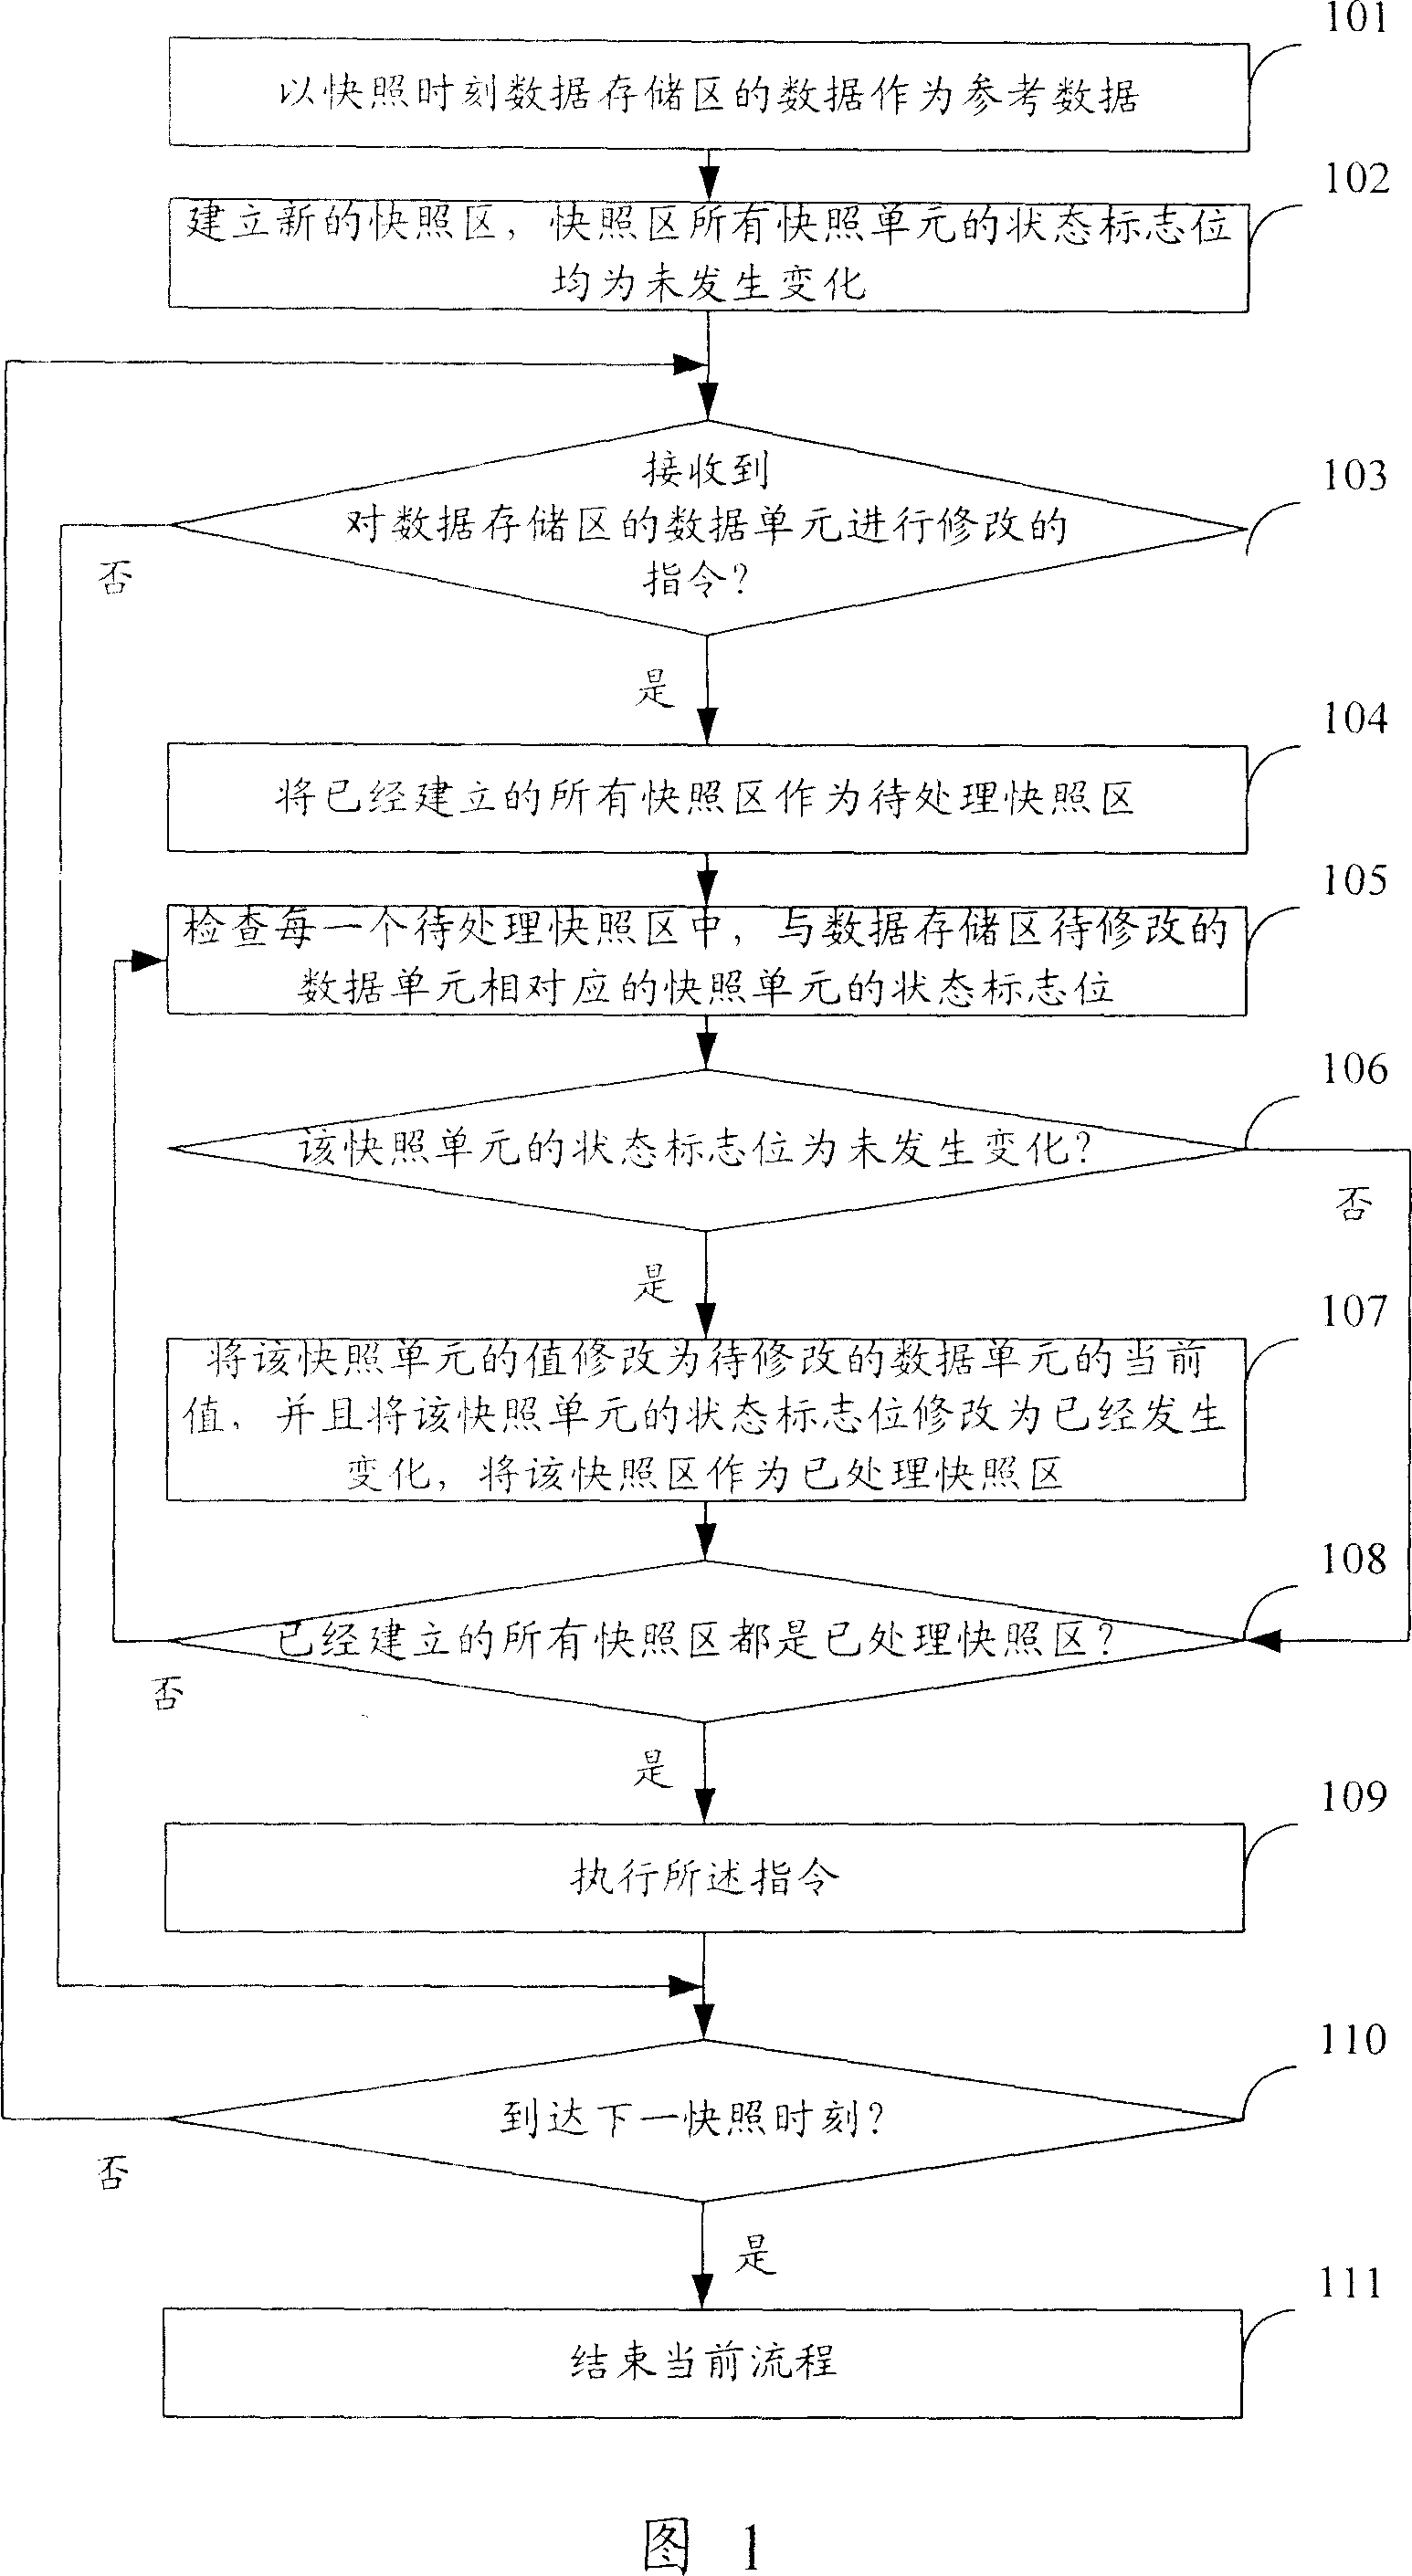 Method and system for accomplishing data backup and recovery